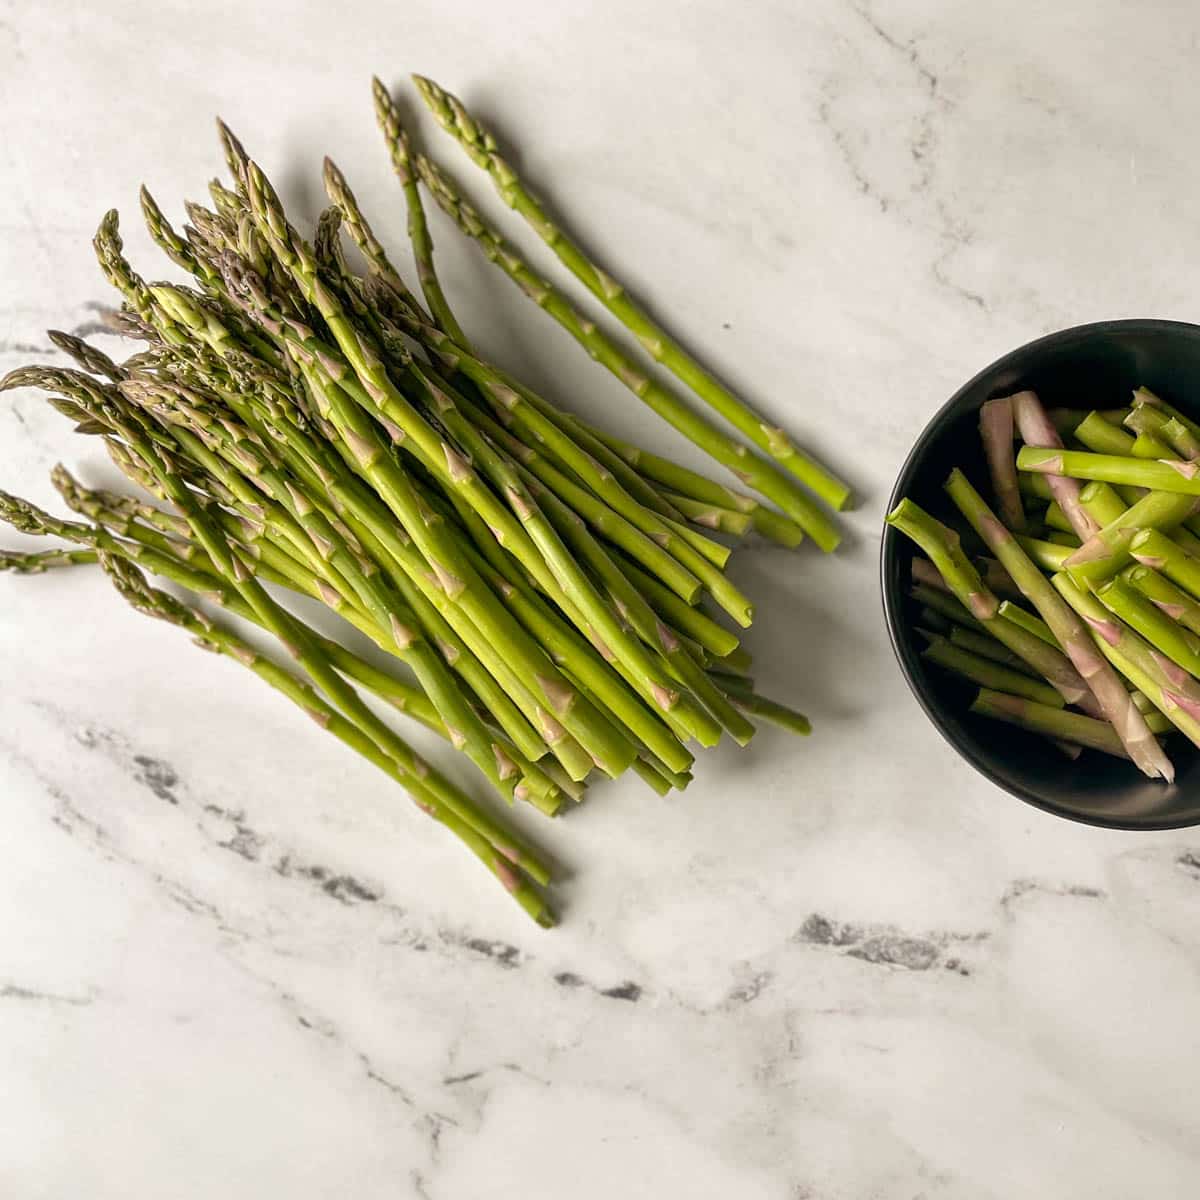 A bunch of trimmed asparagus sits on a white marble counter.